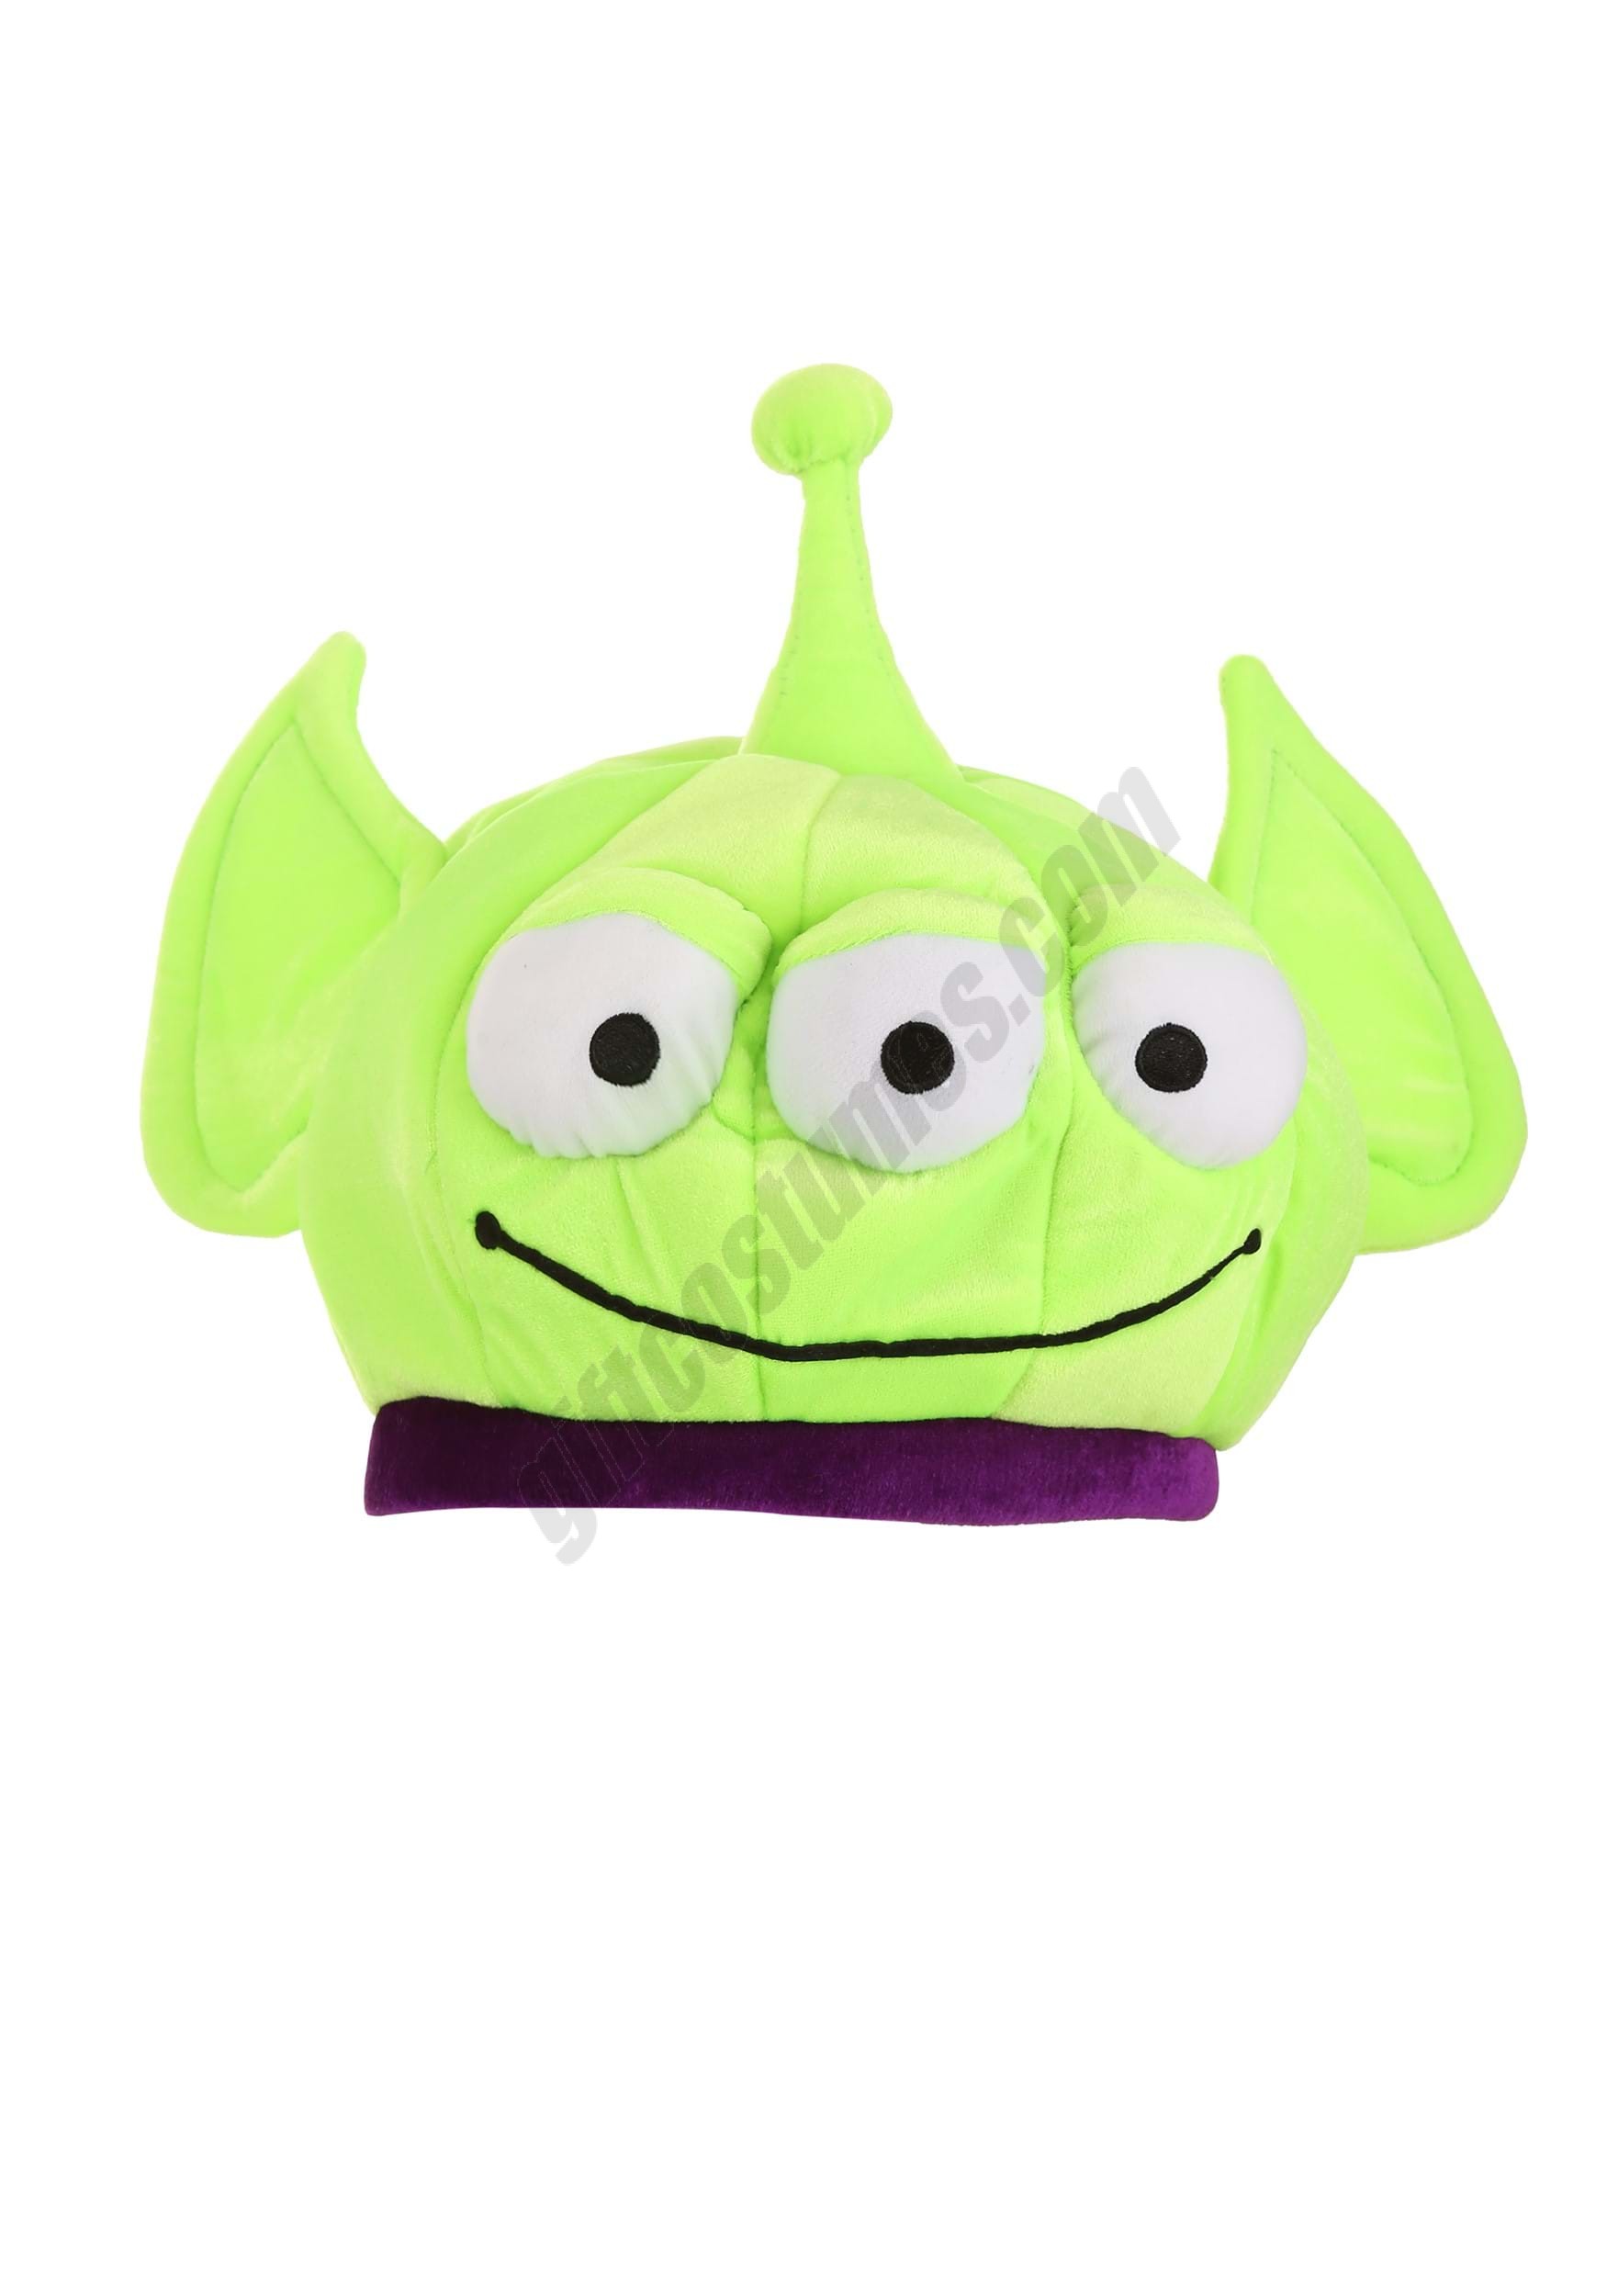 Toy Story- Alien Plush Hat Promotions - Toy Story- Alien Plush Hat Promotions